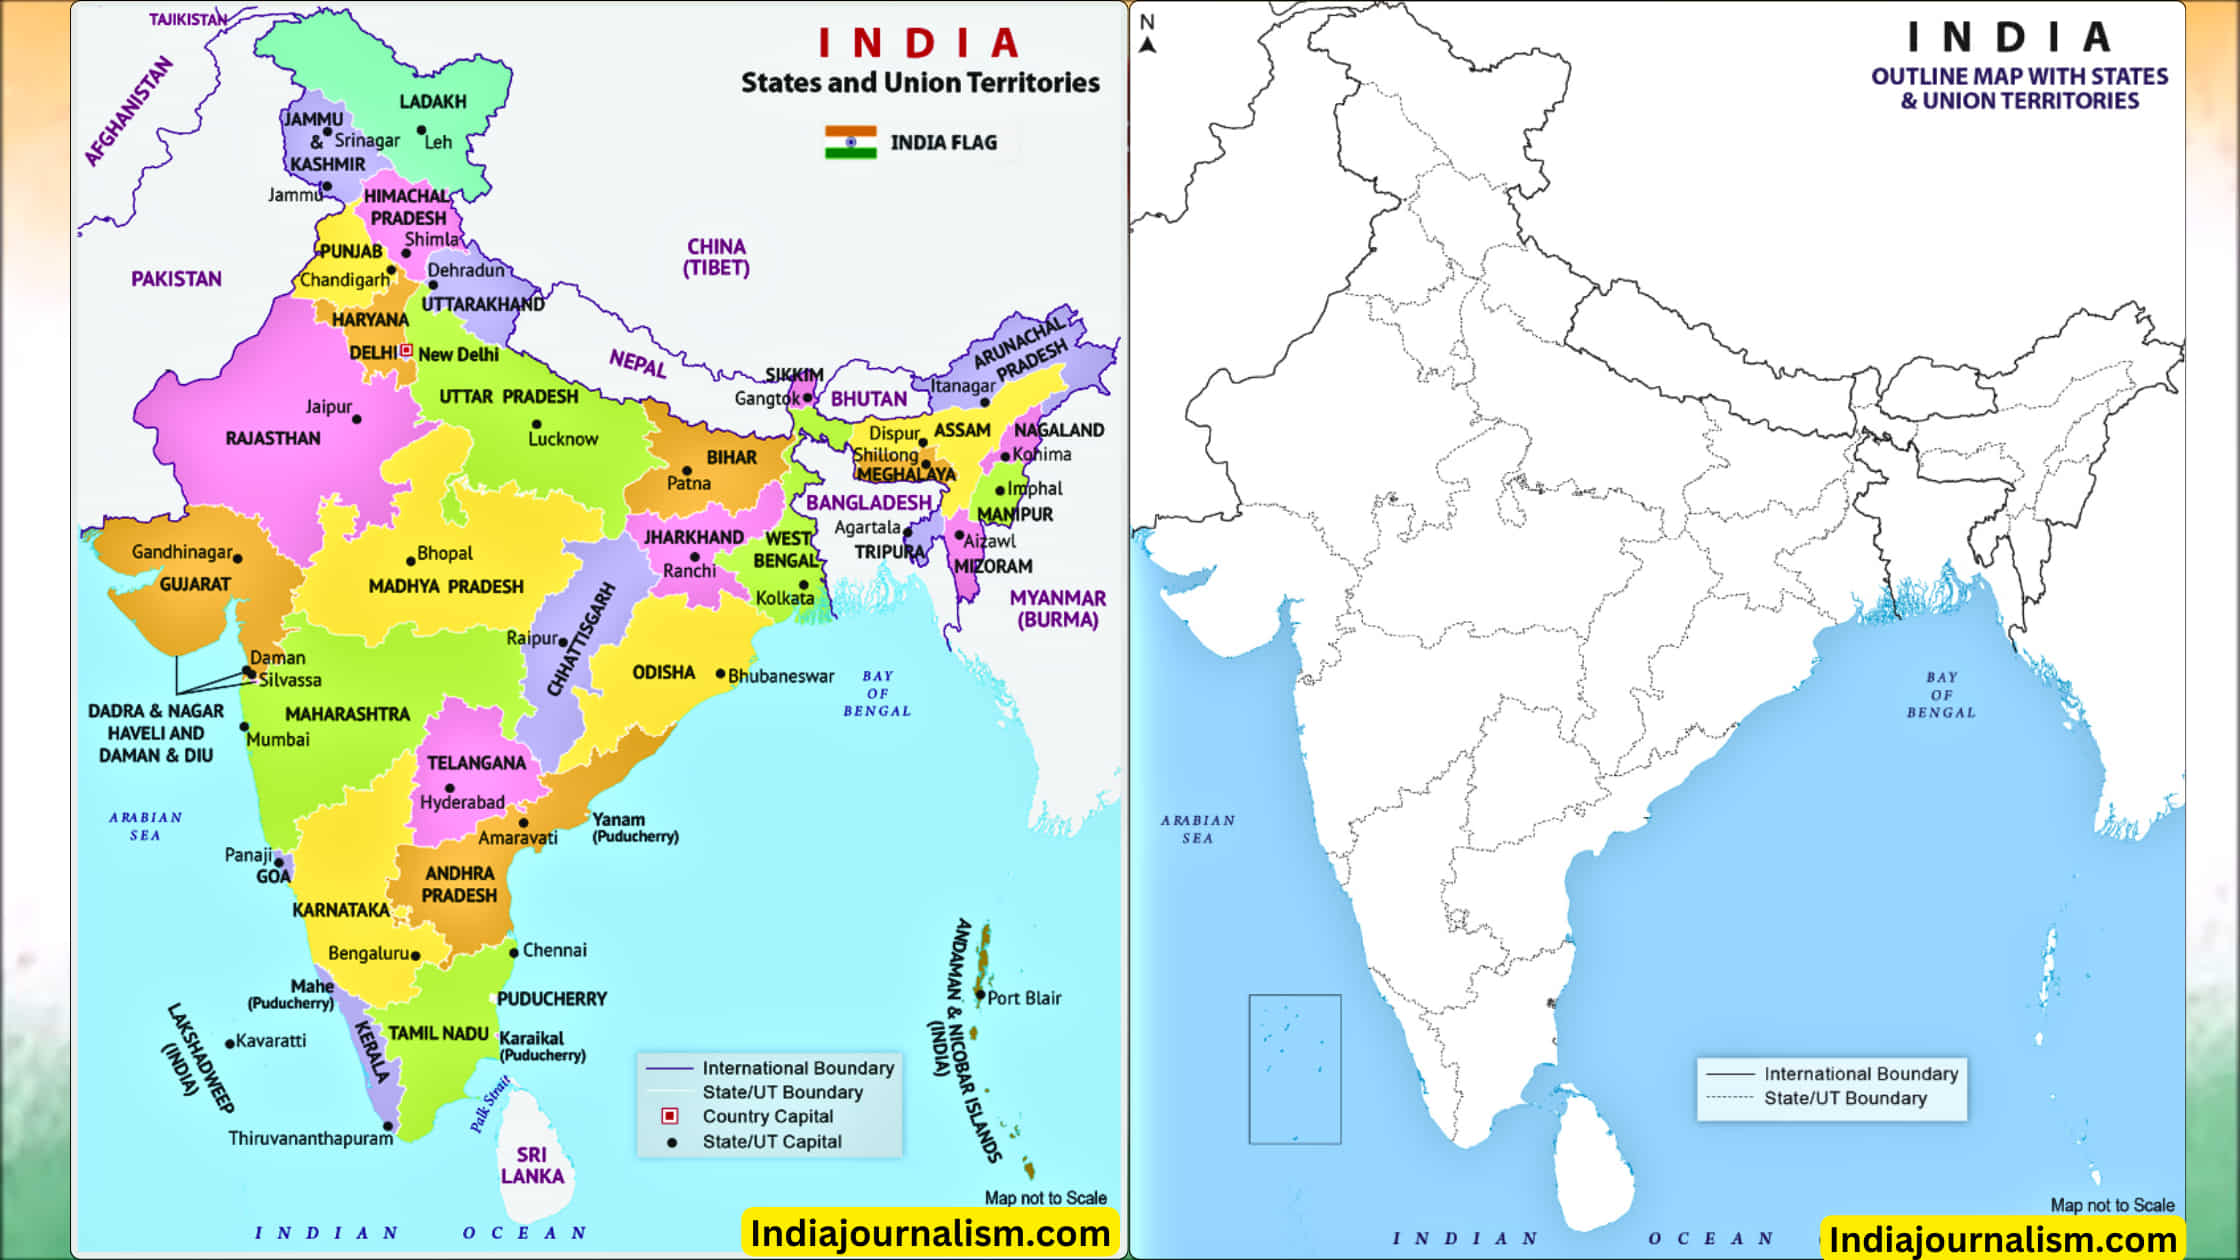 India-Map-Free-Download-in-Hd-format-for-UPSC-and-other-Exams-india-political-map